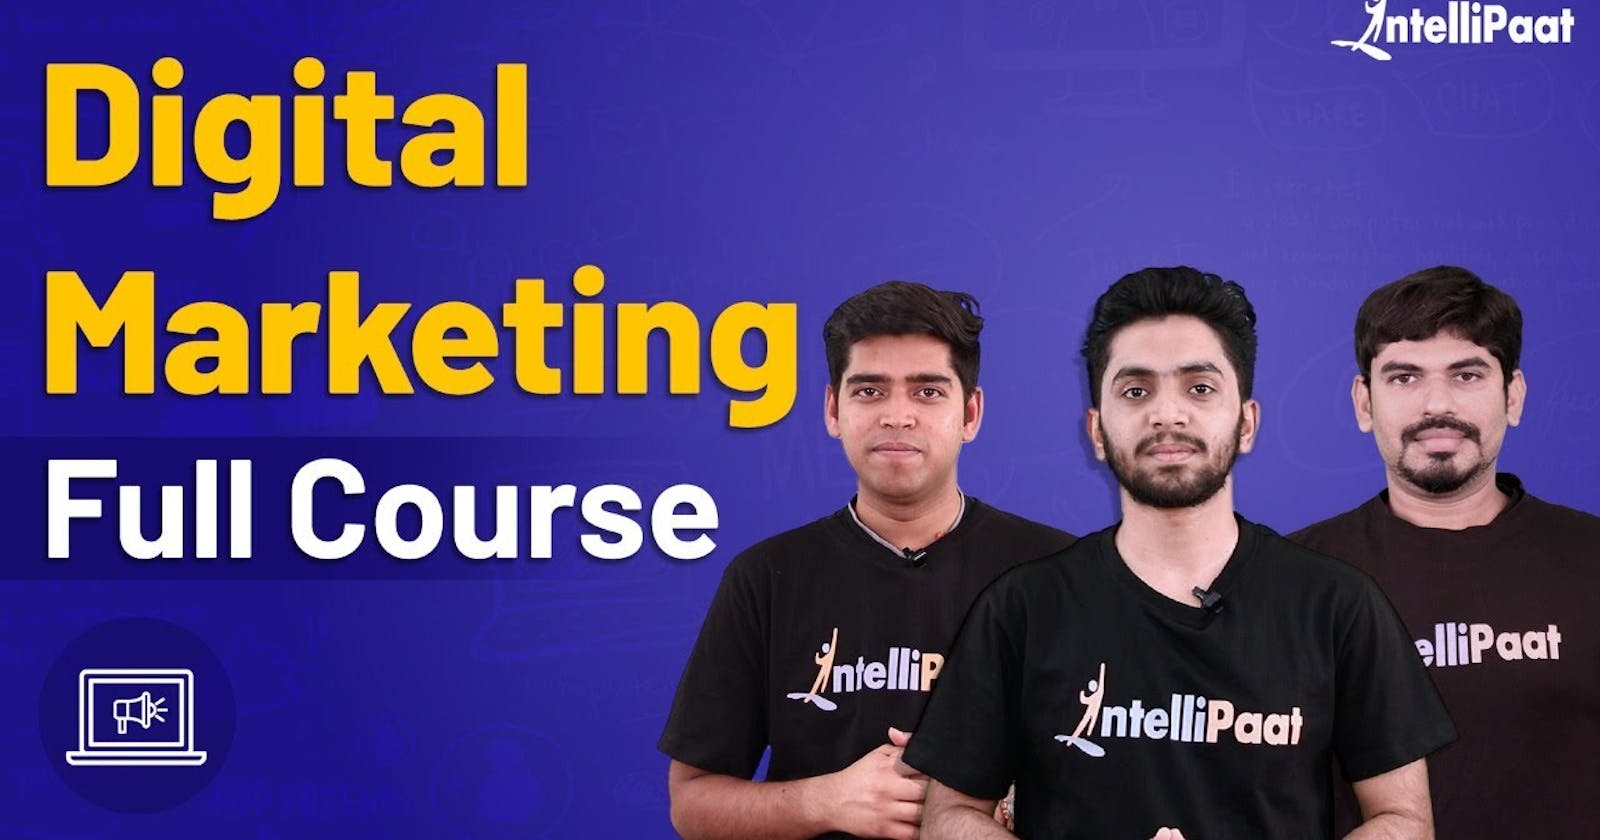 Digital Marketing Course: Every lesson counts